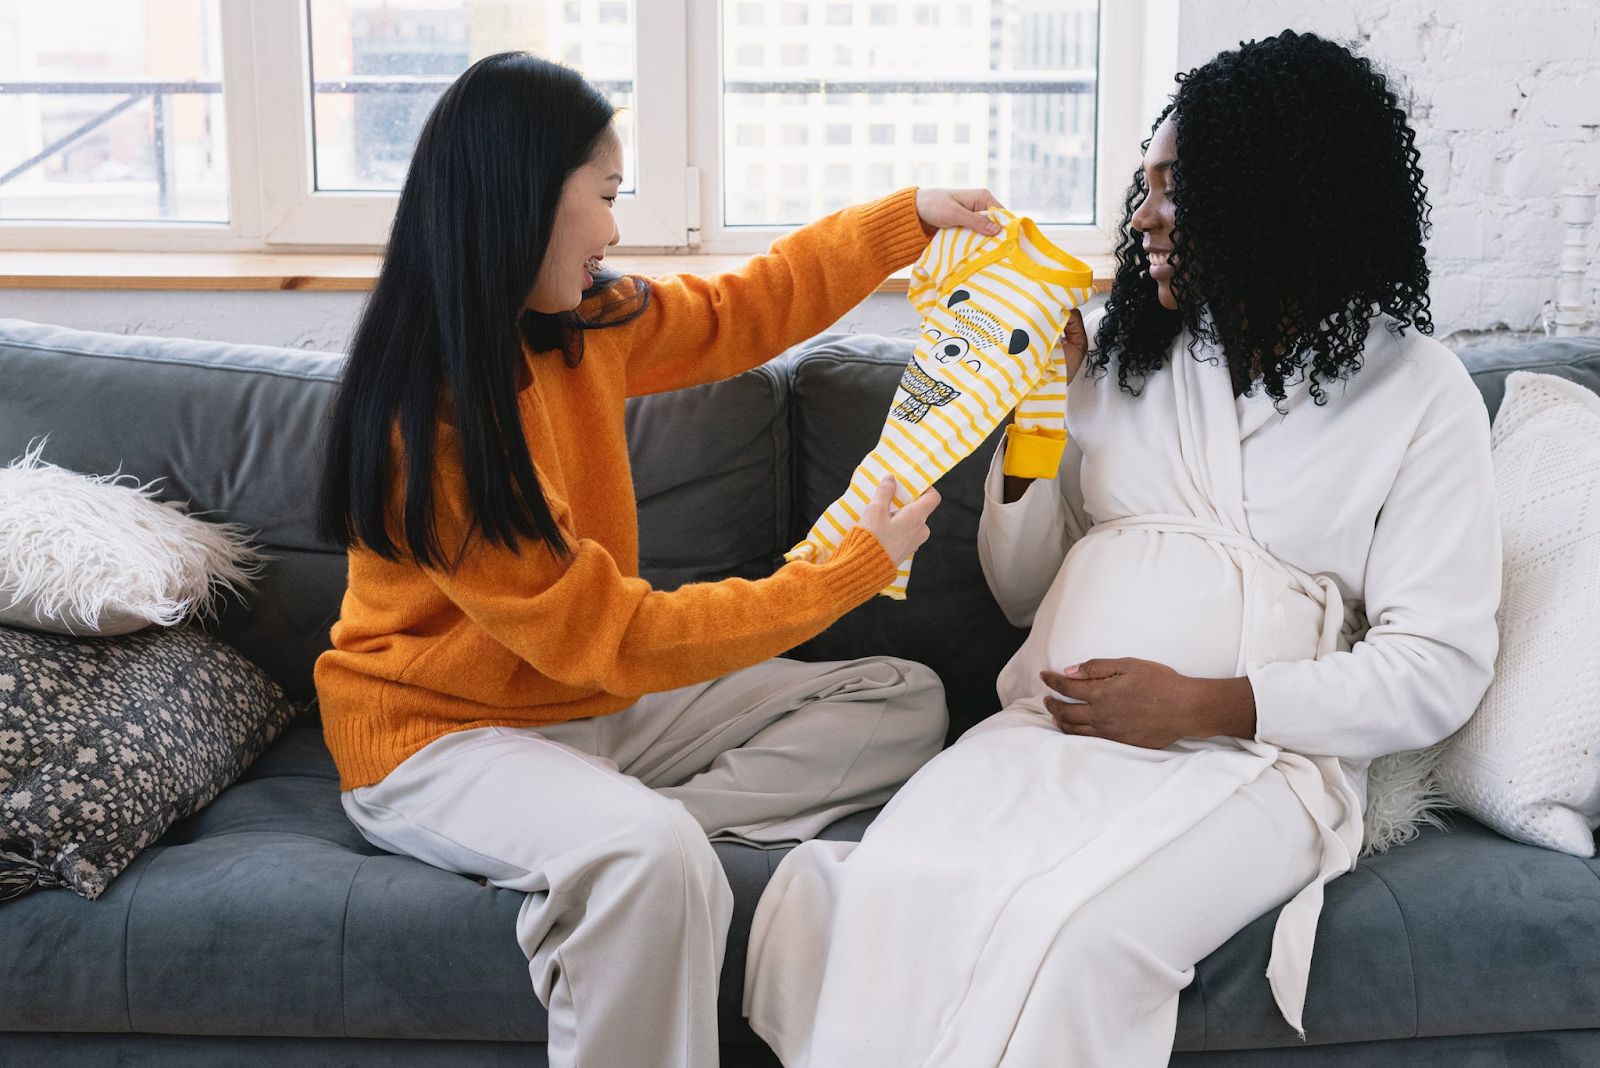 Pregnant woman receiving baby cloth gift.